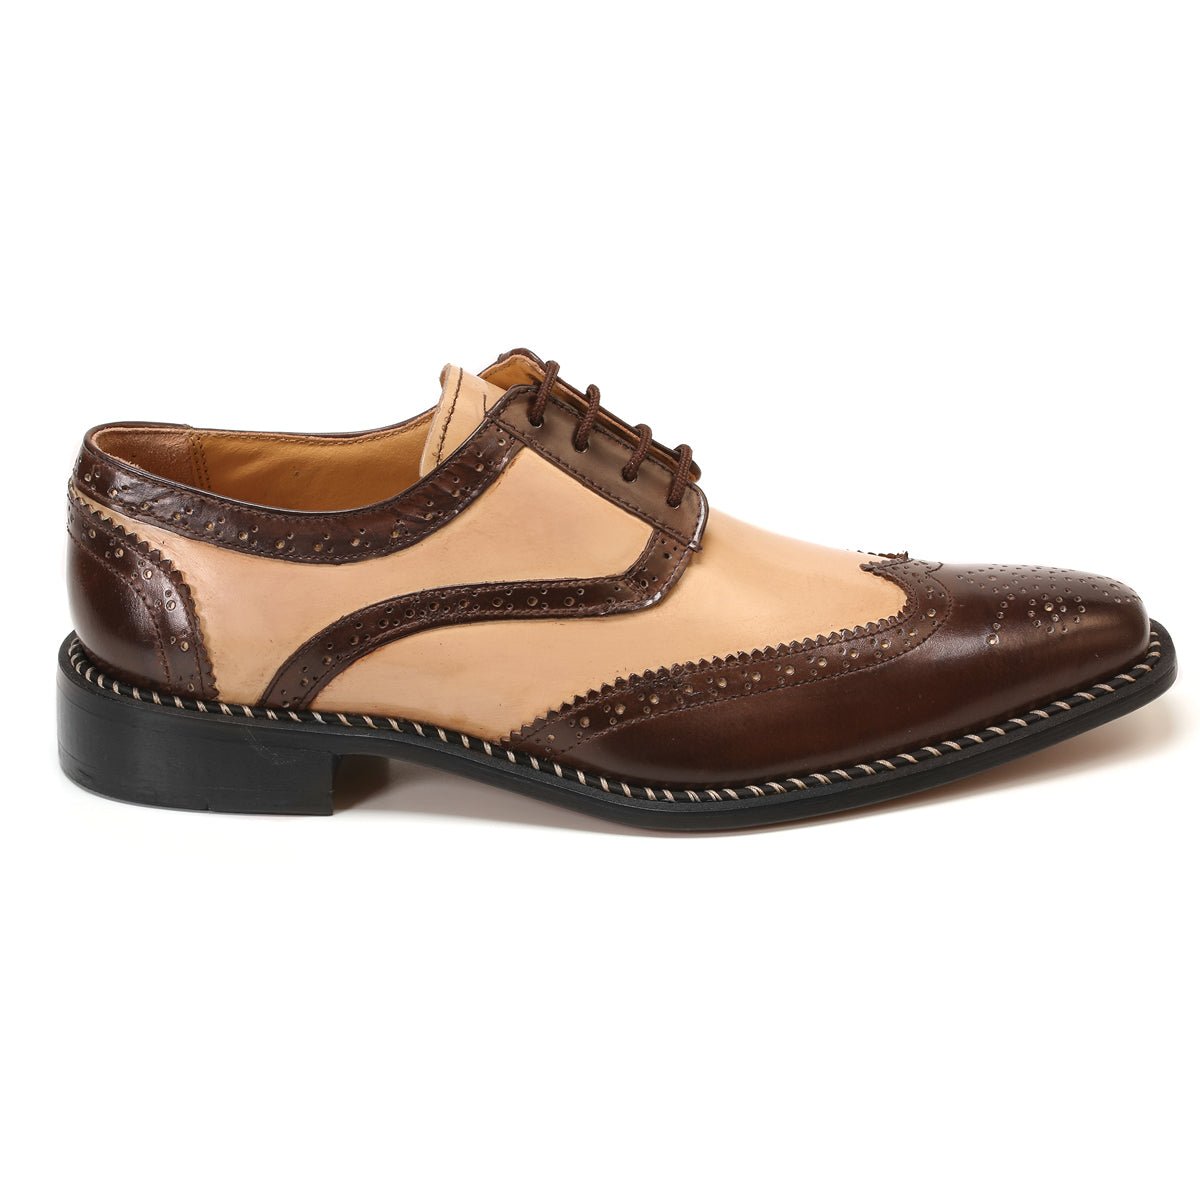 Hope Leather Two Toned Oxford Style Dress Shoes with Unique Brogue ...